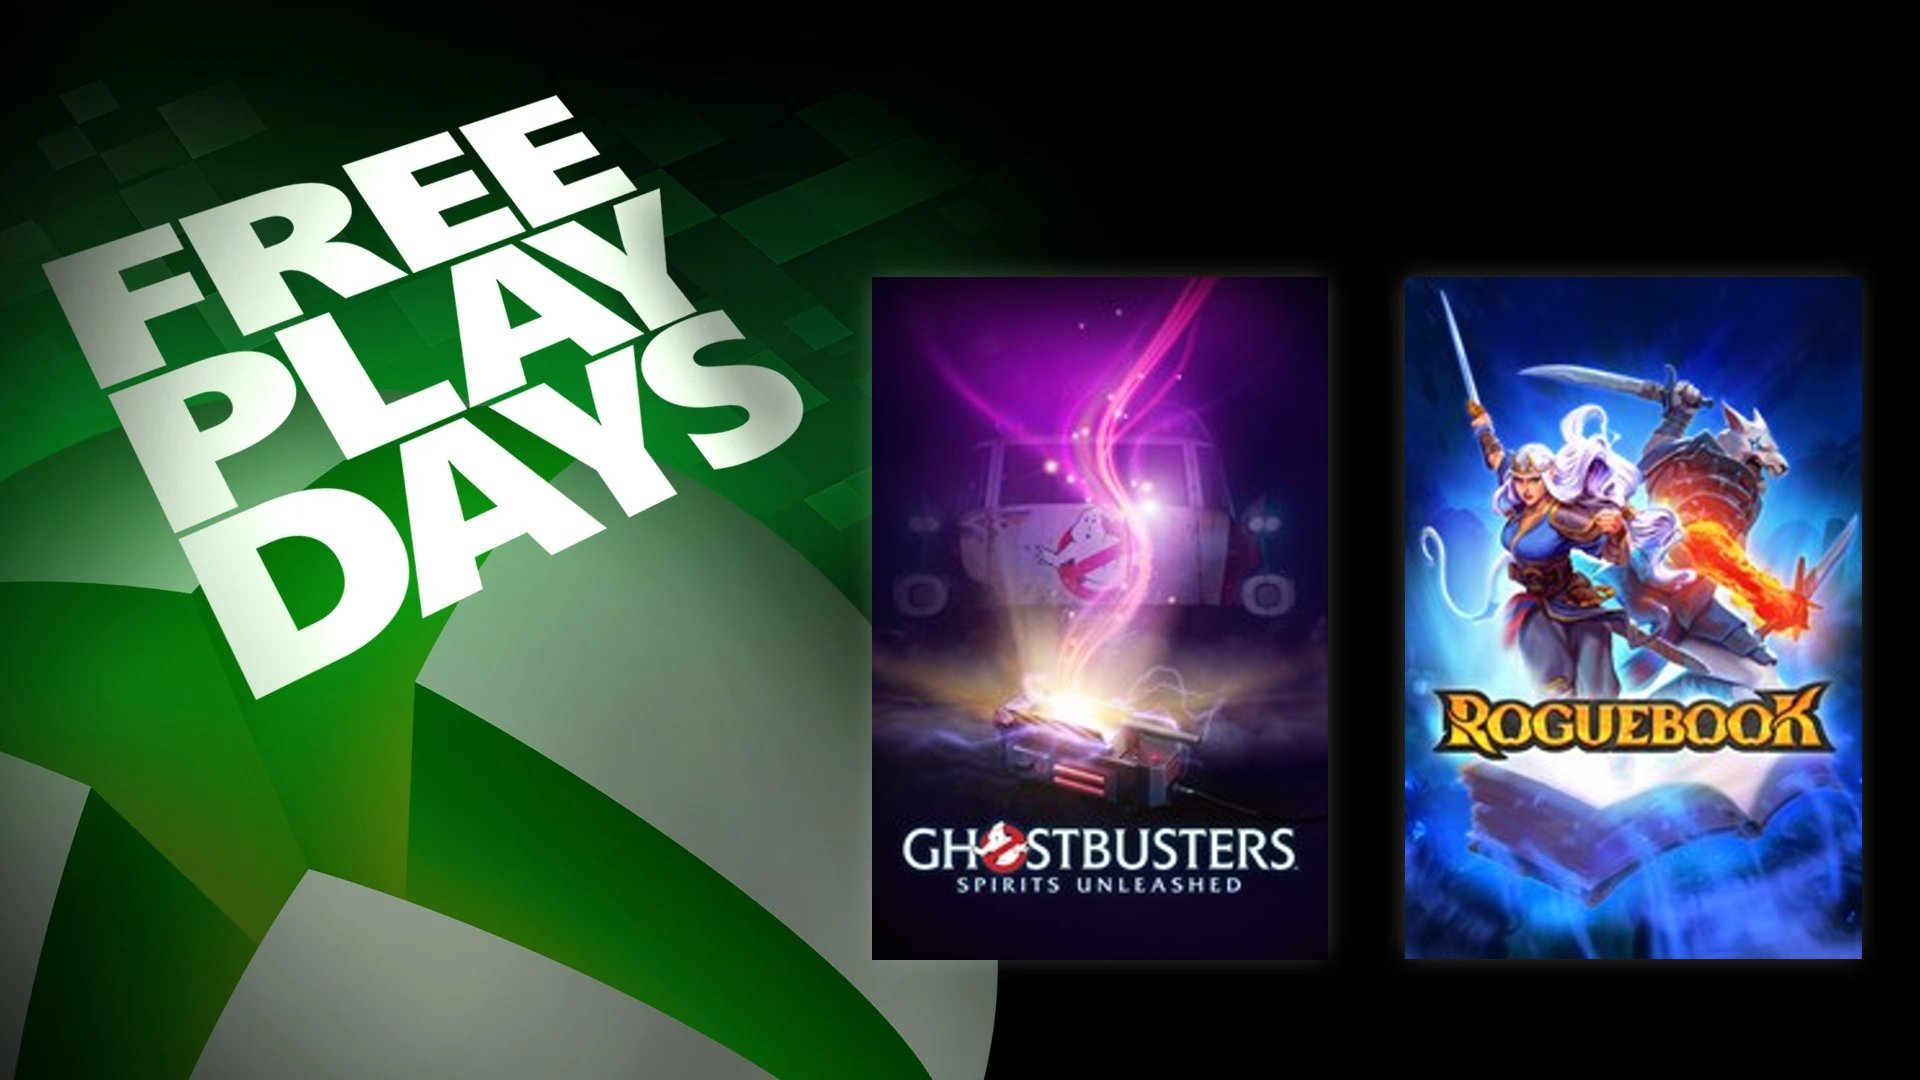 Play Ghostbusters: Spirits Unleashed for free this weekend